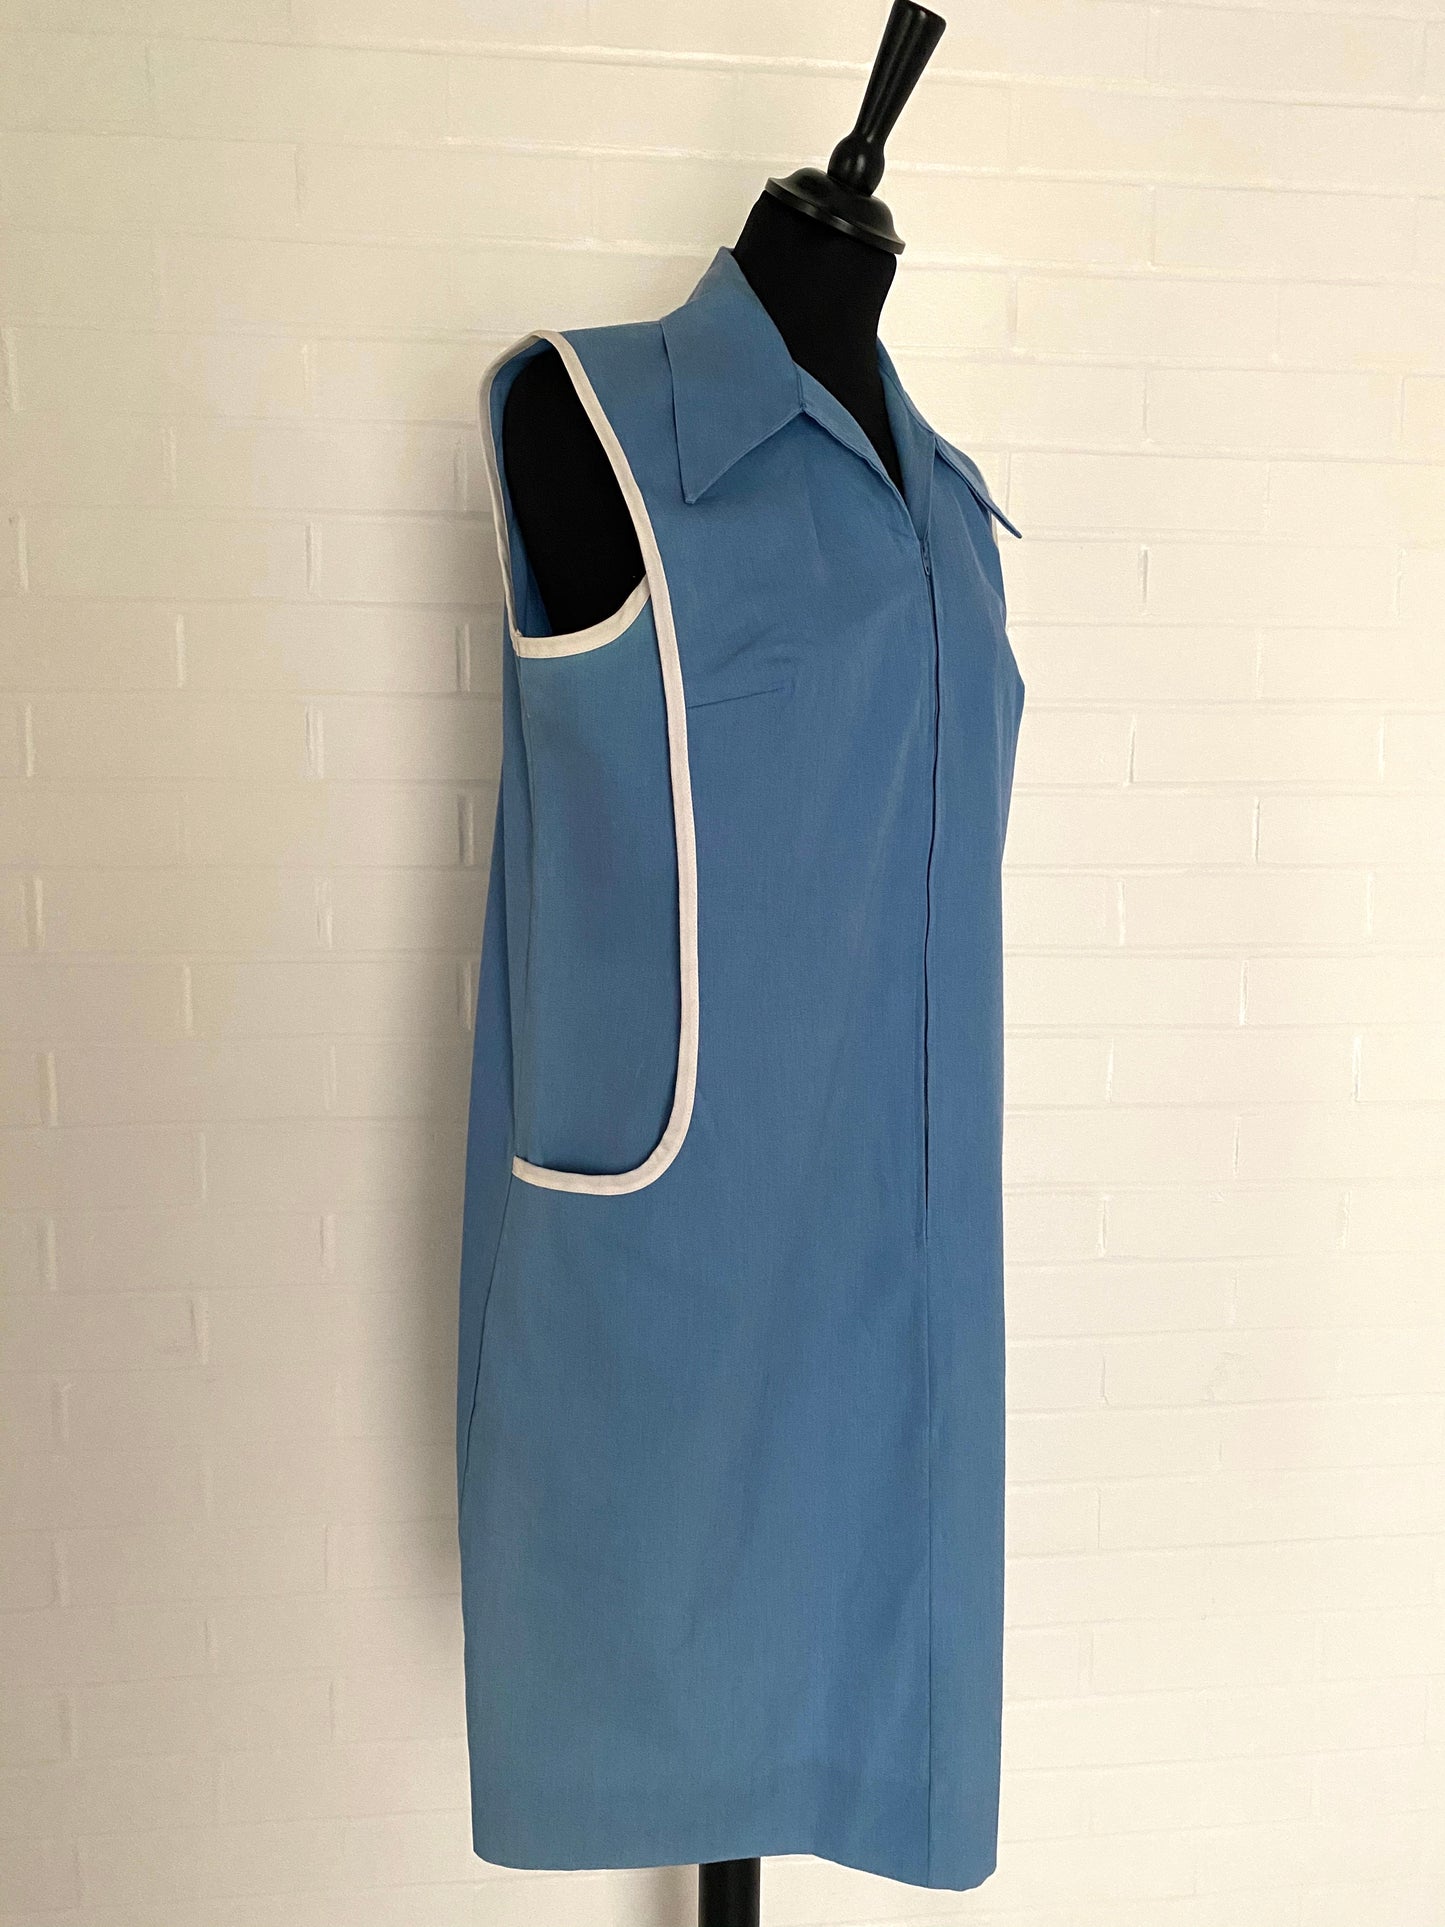 Late 50s/ Early 60s Skimma House Dress